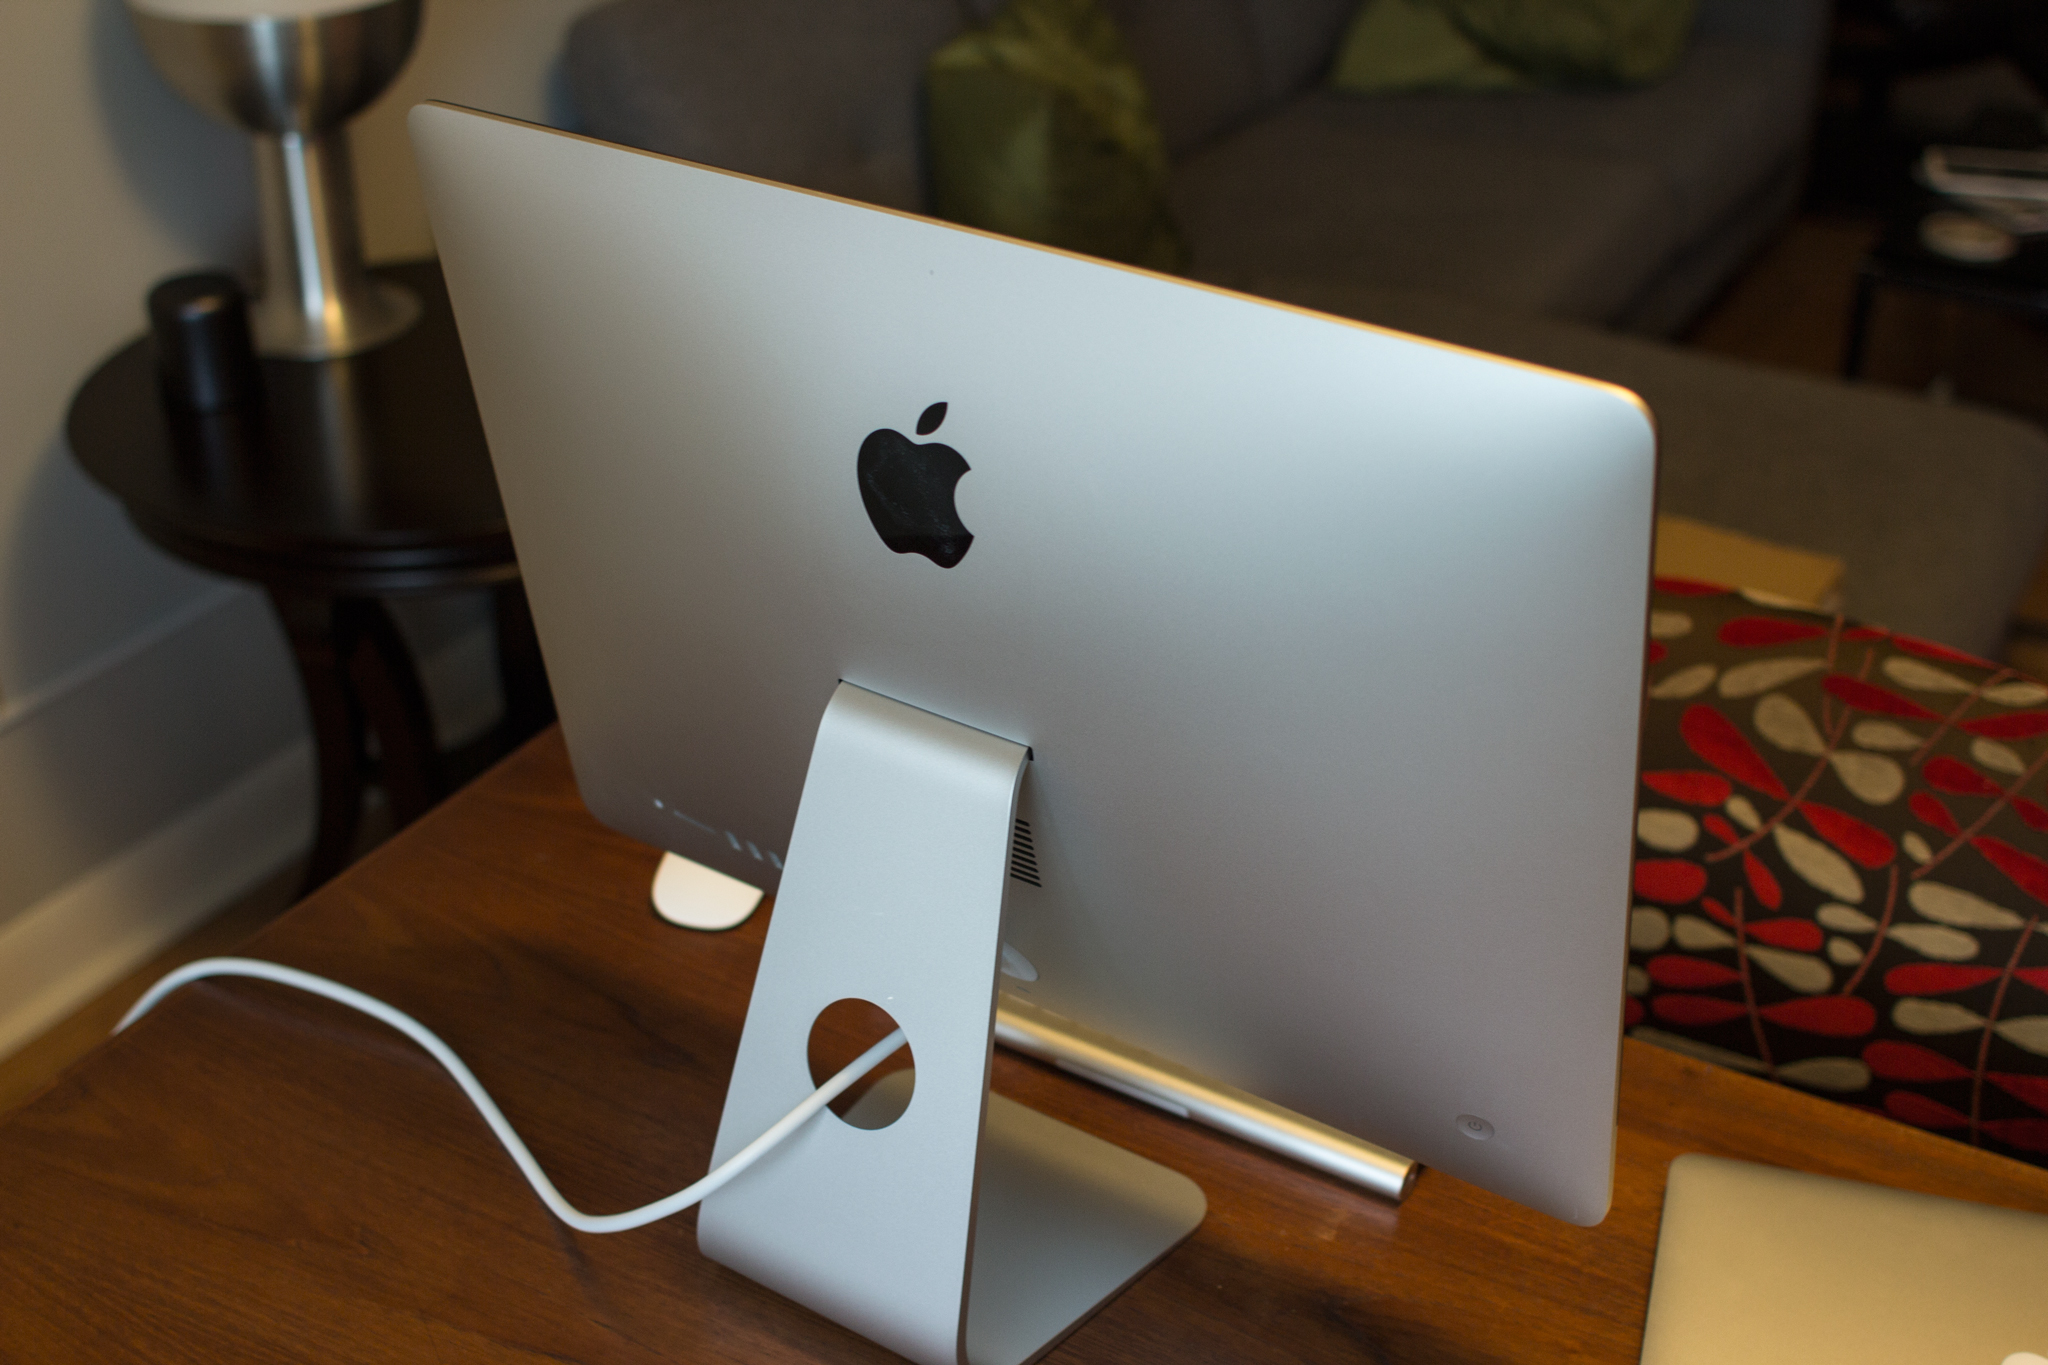 21.5-inch 2012 iMac, from the back